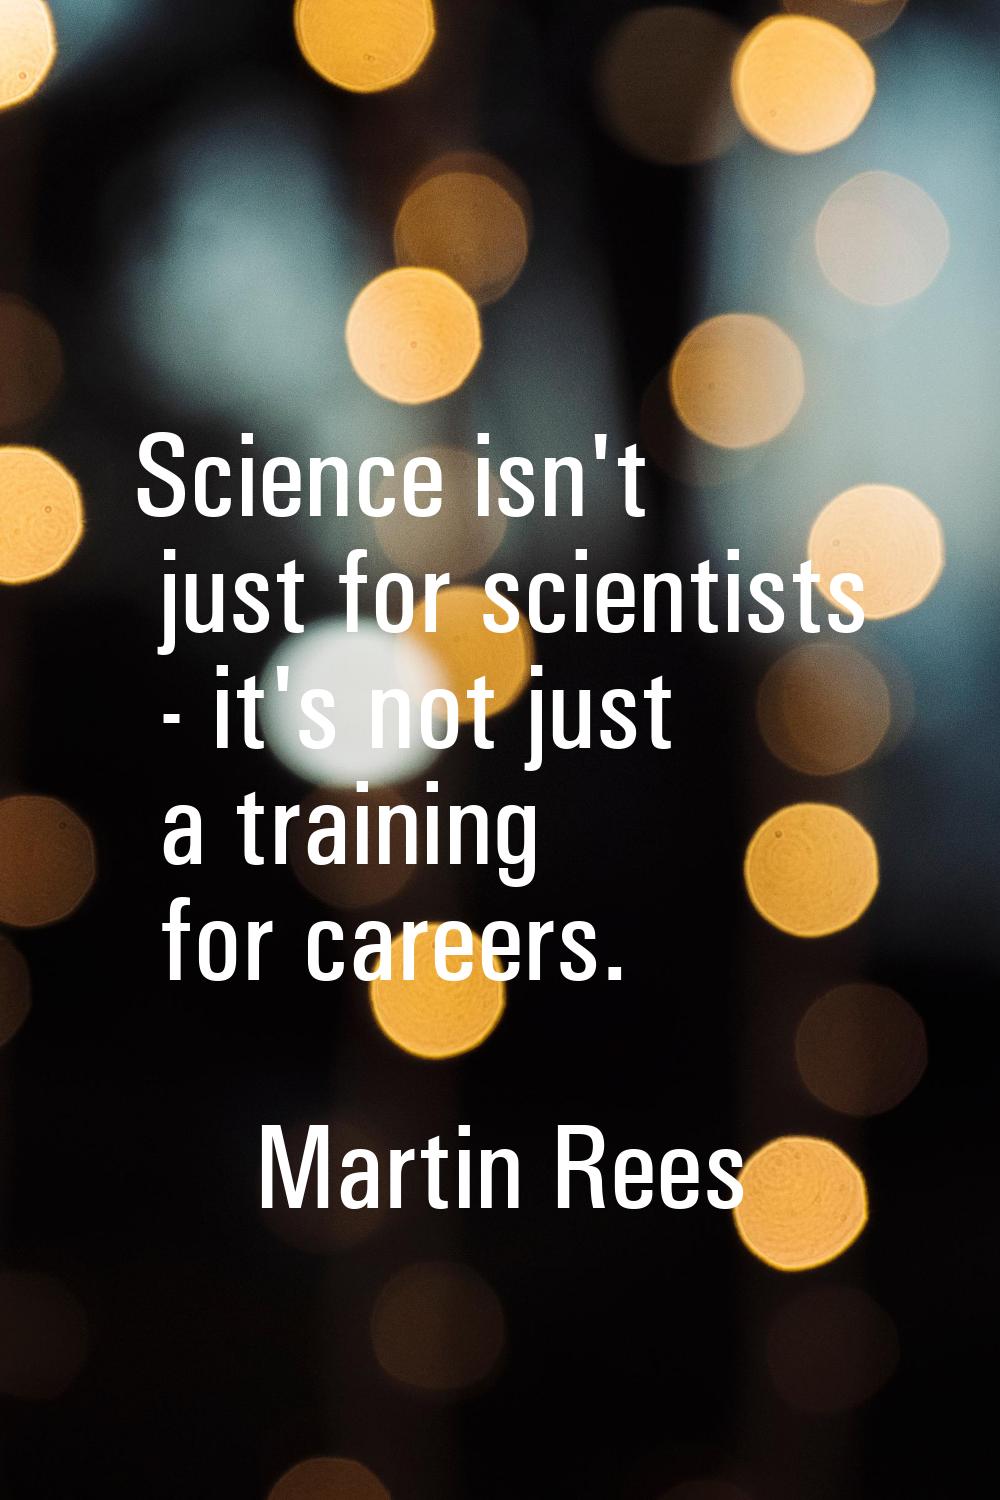 Science isn't just for scientists - it's not just a training for careers.